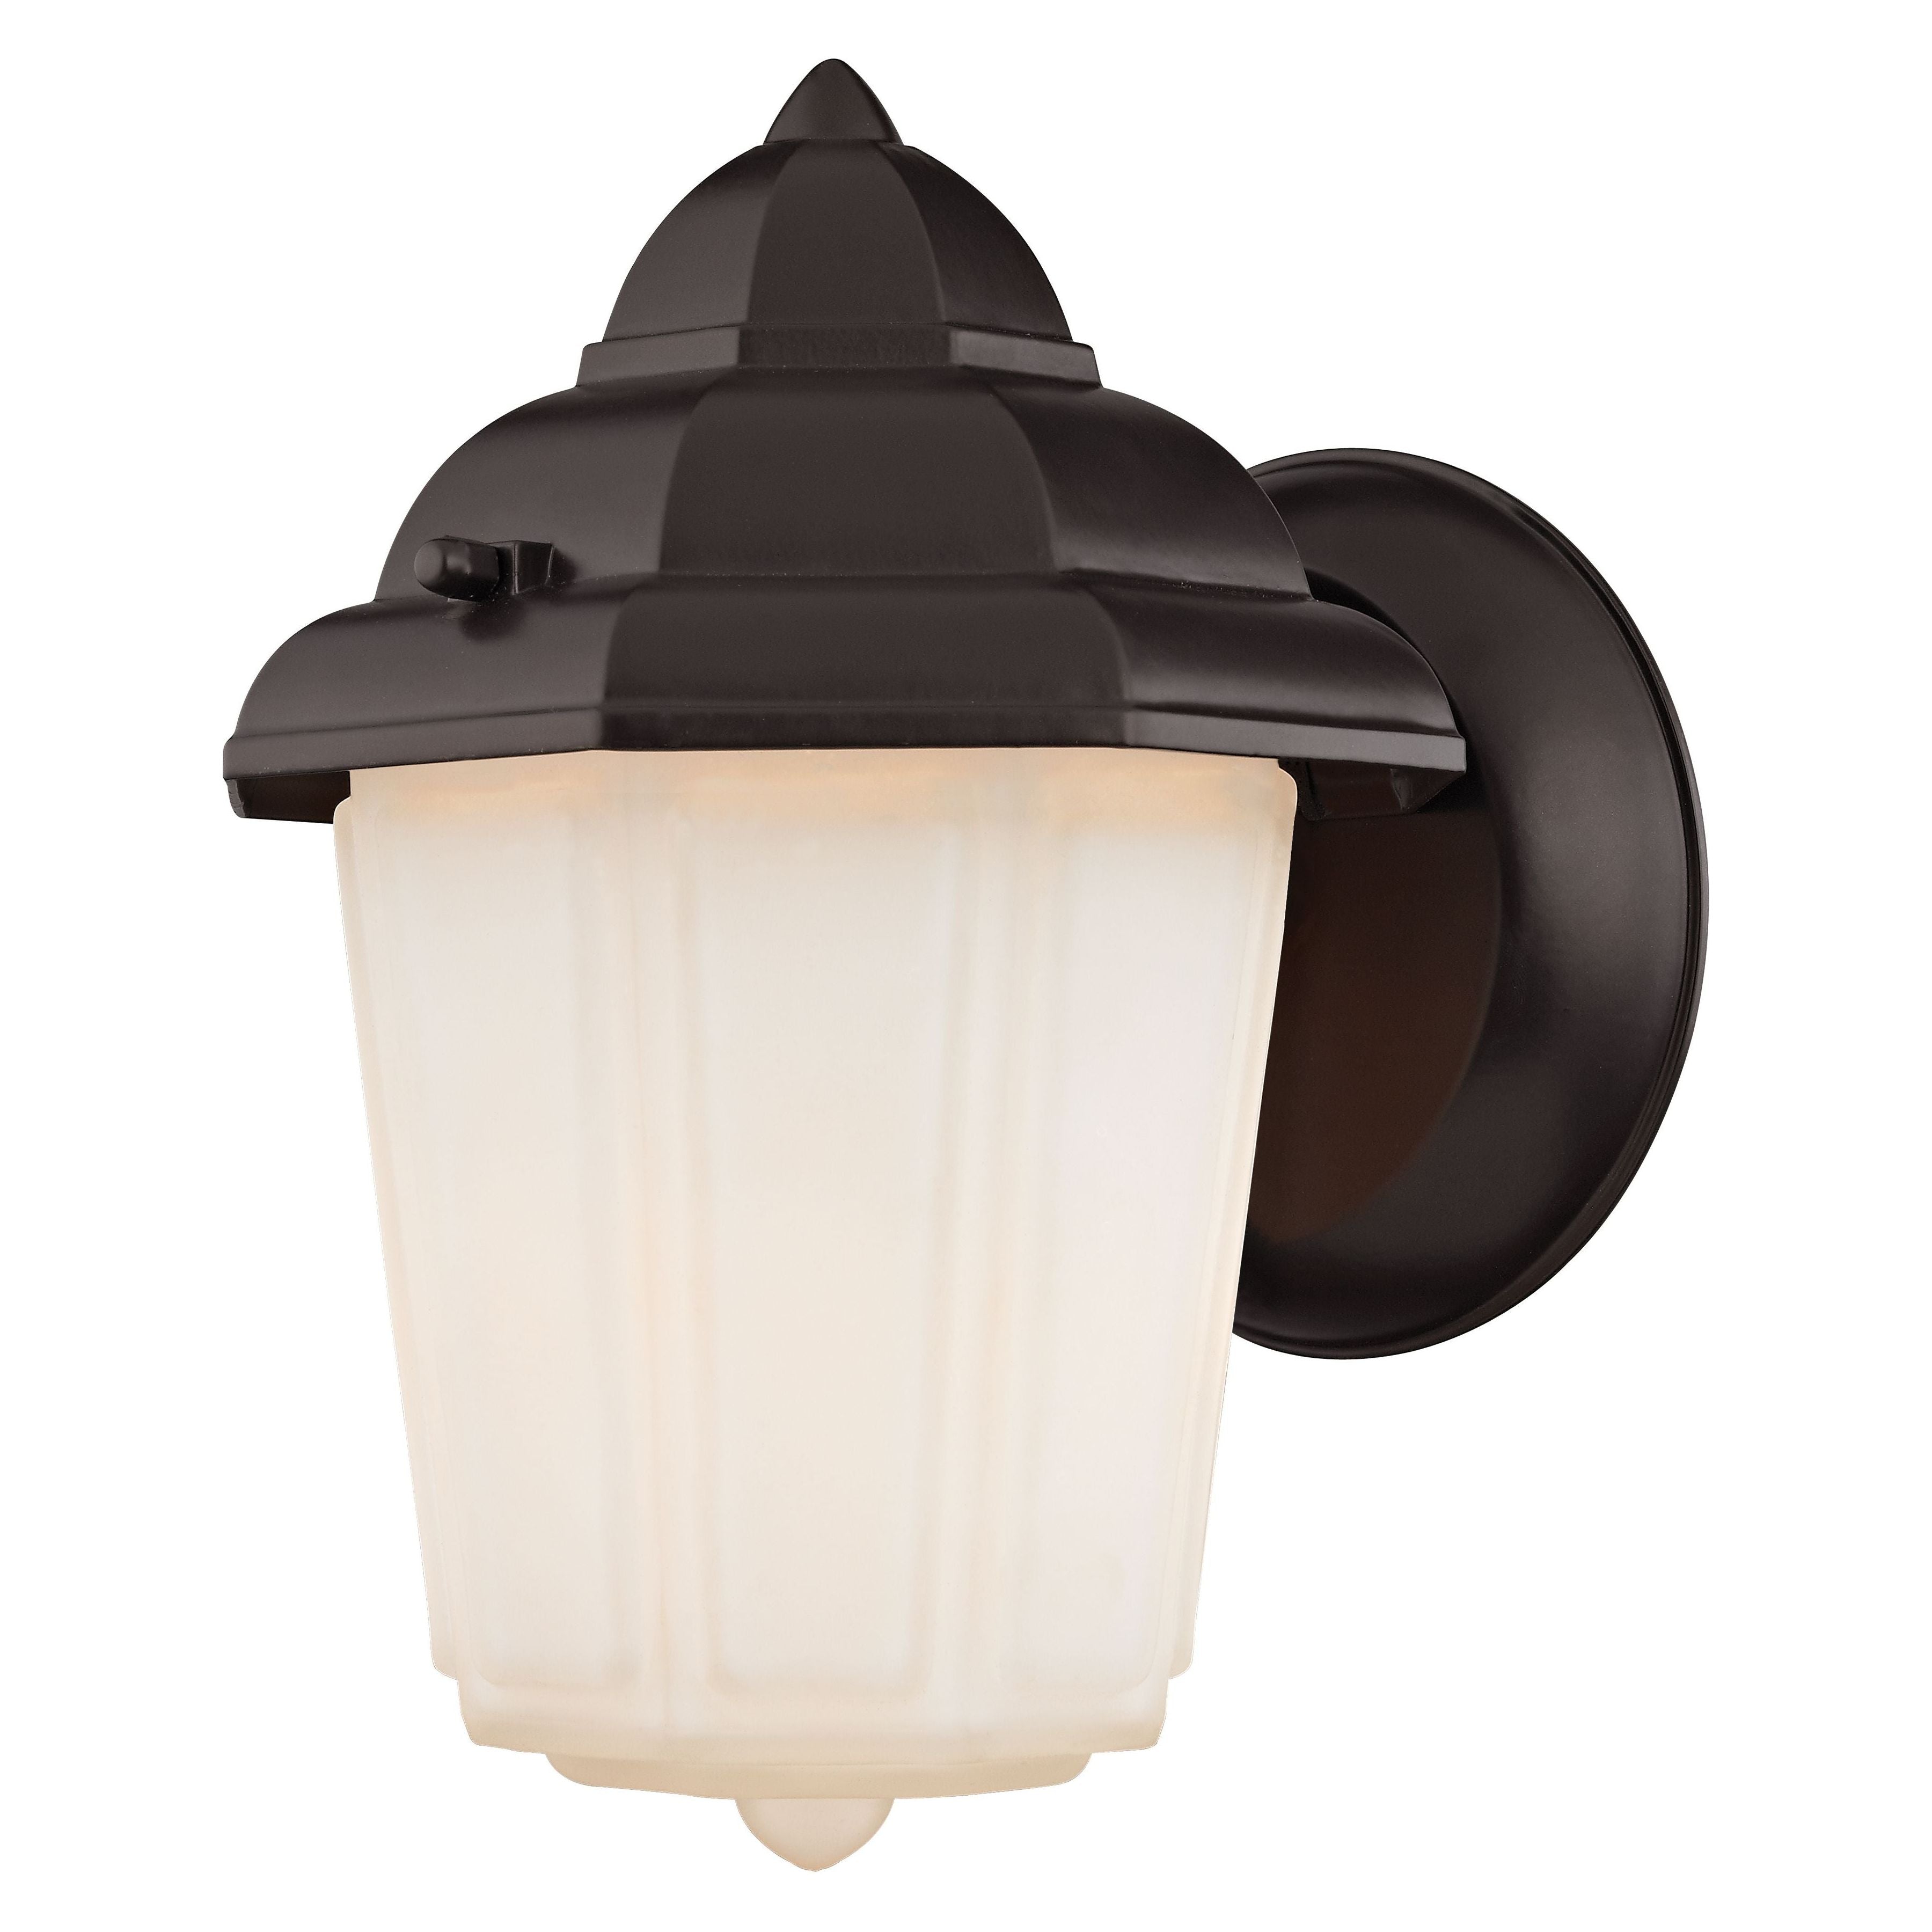 Cotswold 9" High 1-Light Outdoor Sconce